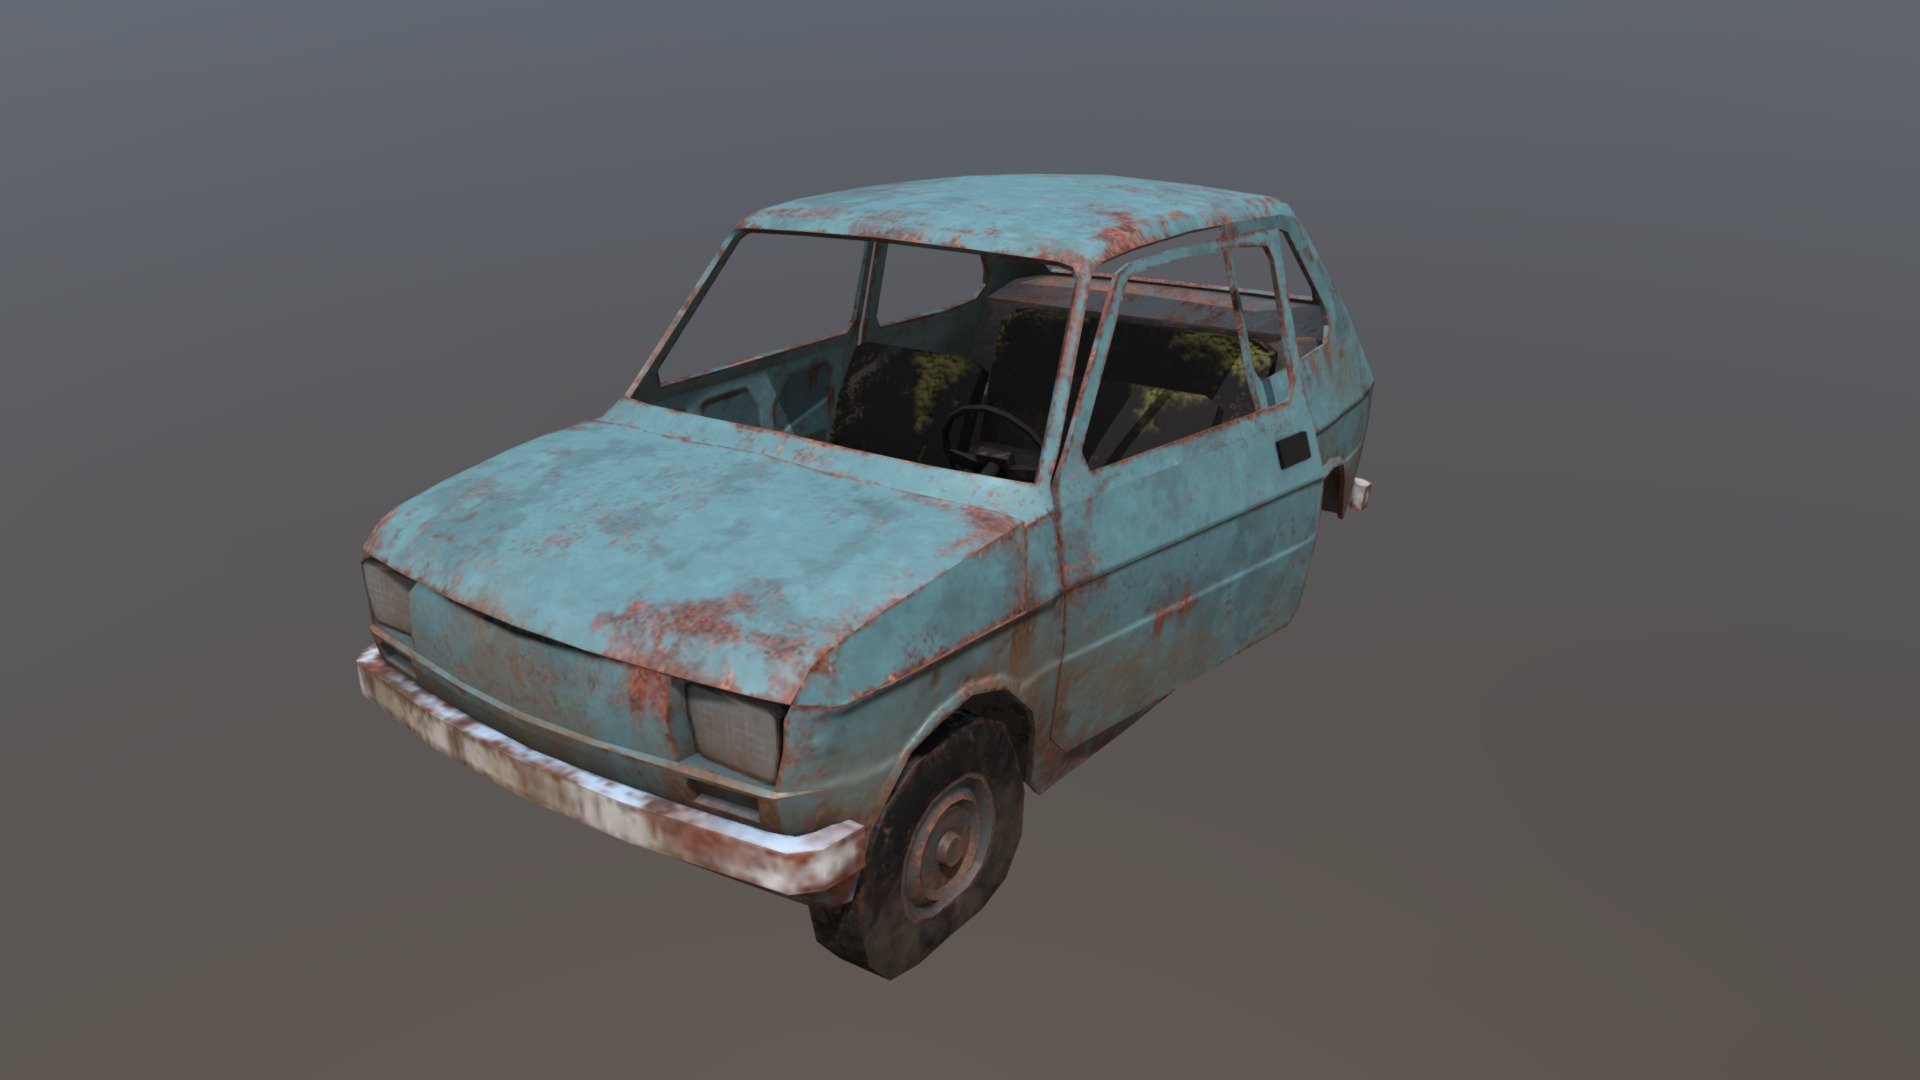 Model made for Half-Life 2 Episode 2. Part of a wrecked vehicle pack 3d model